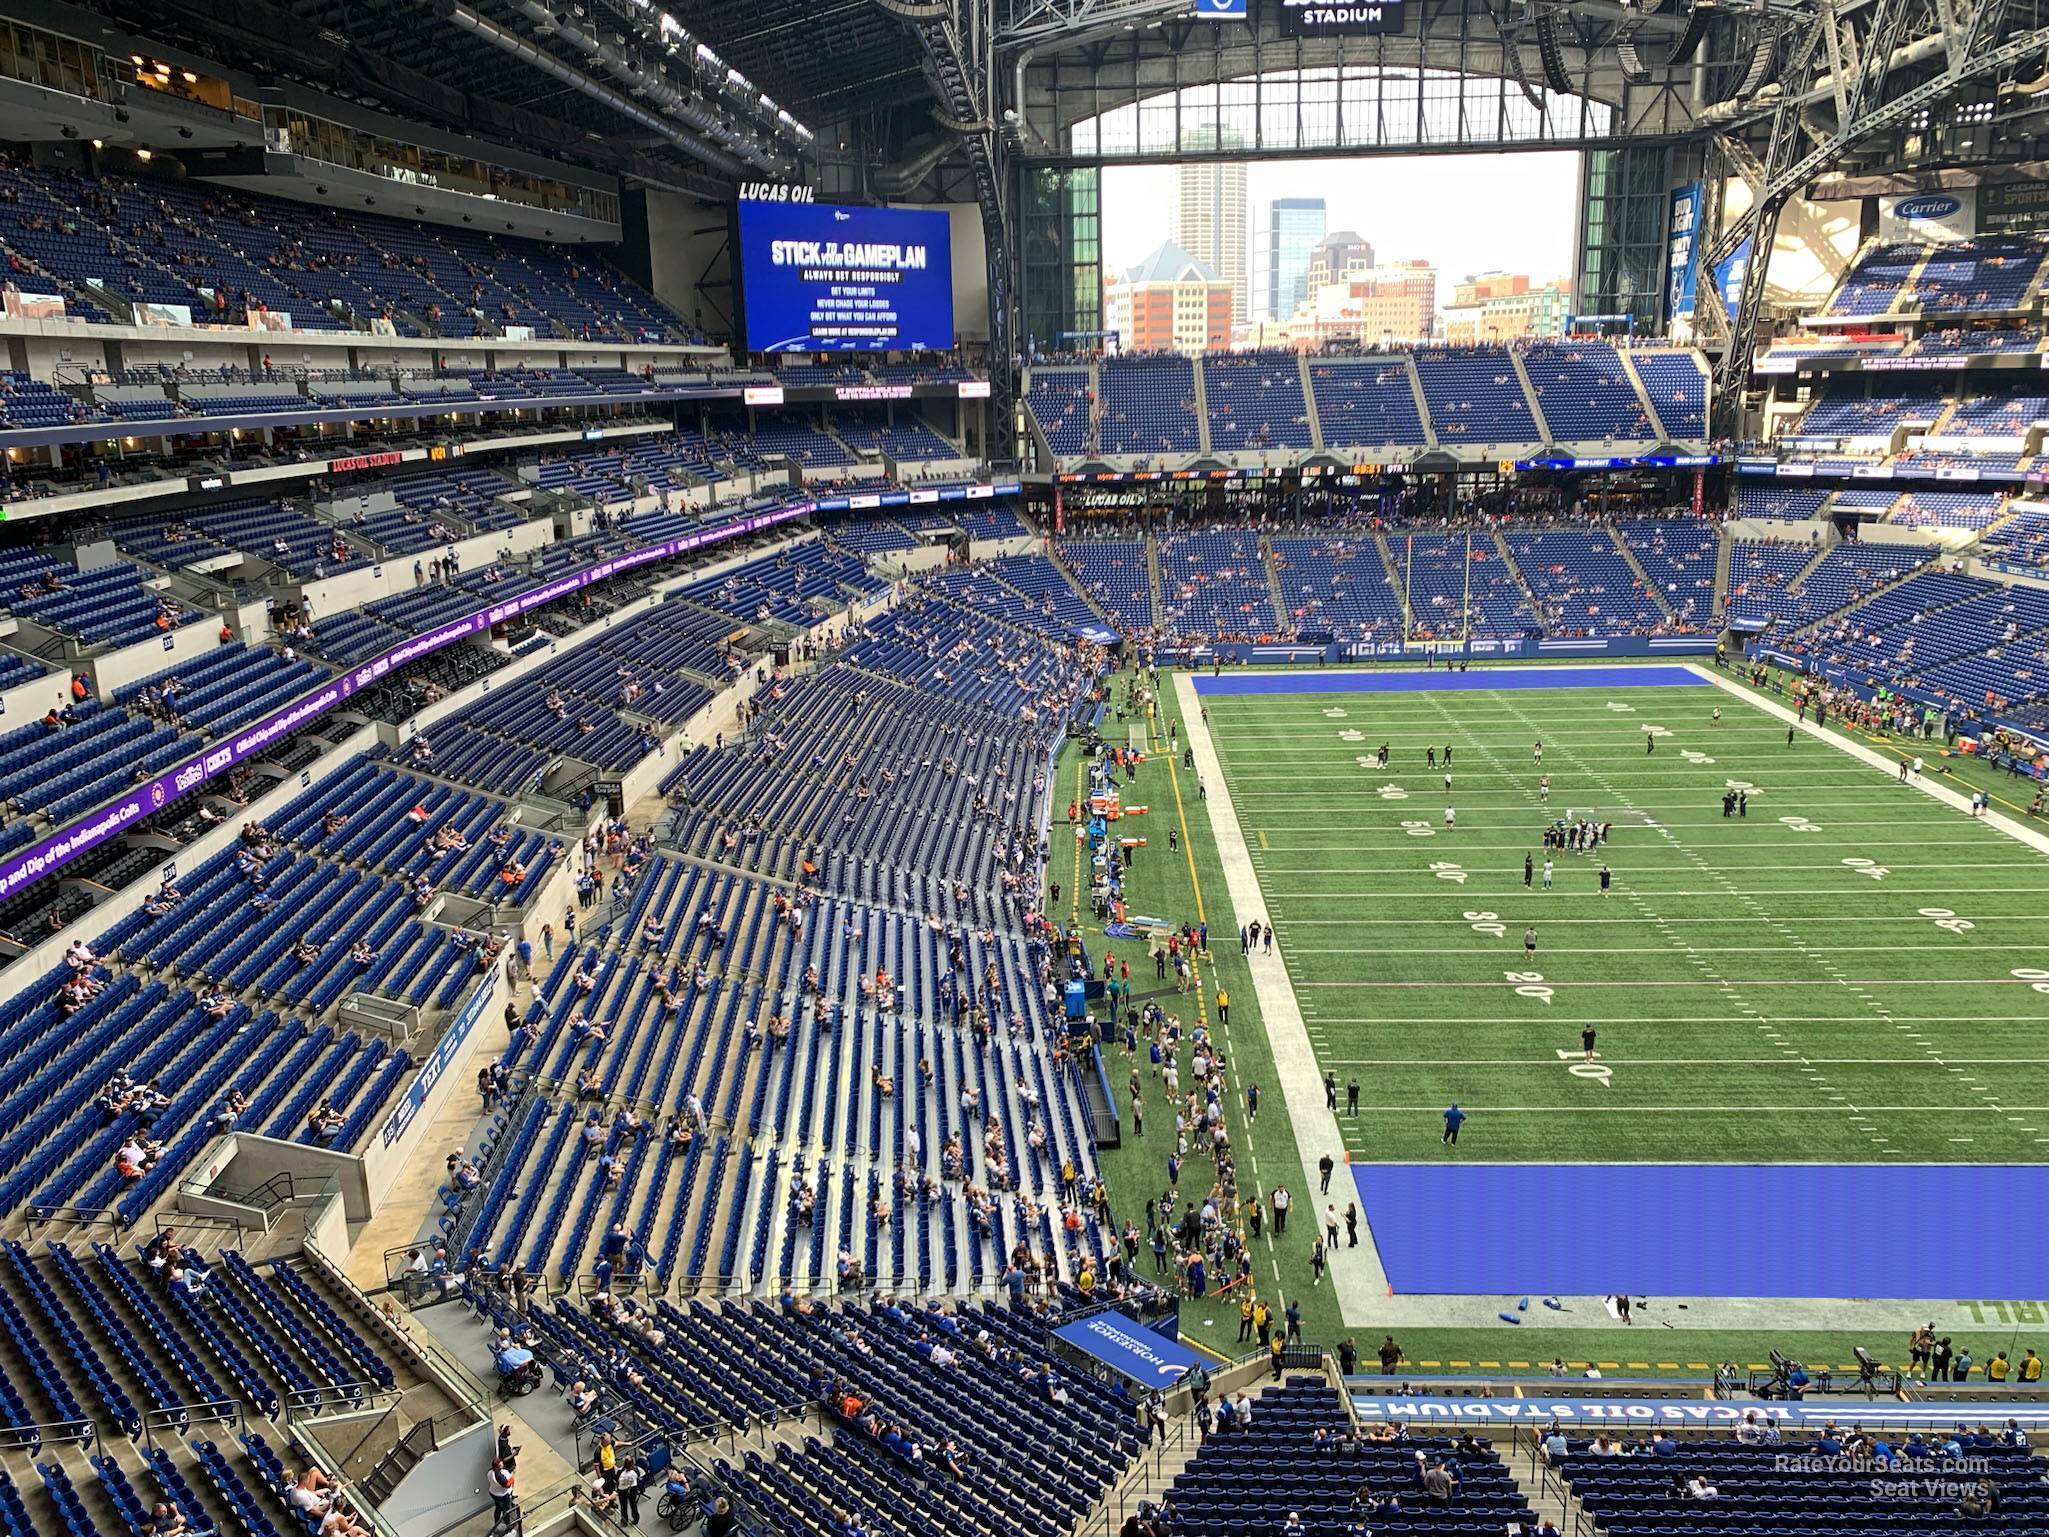 section 529, row 2 seat view  for football - lucas oil stadium